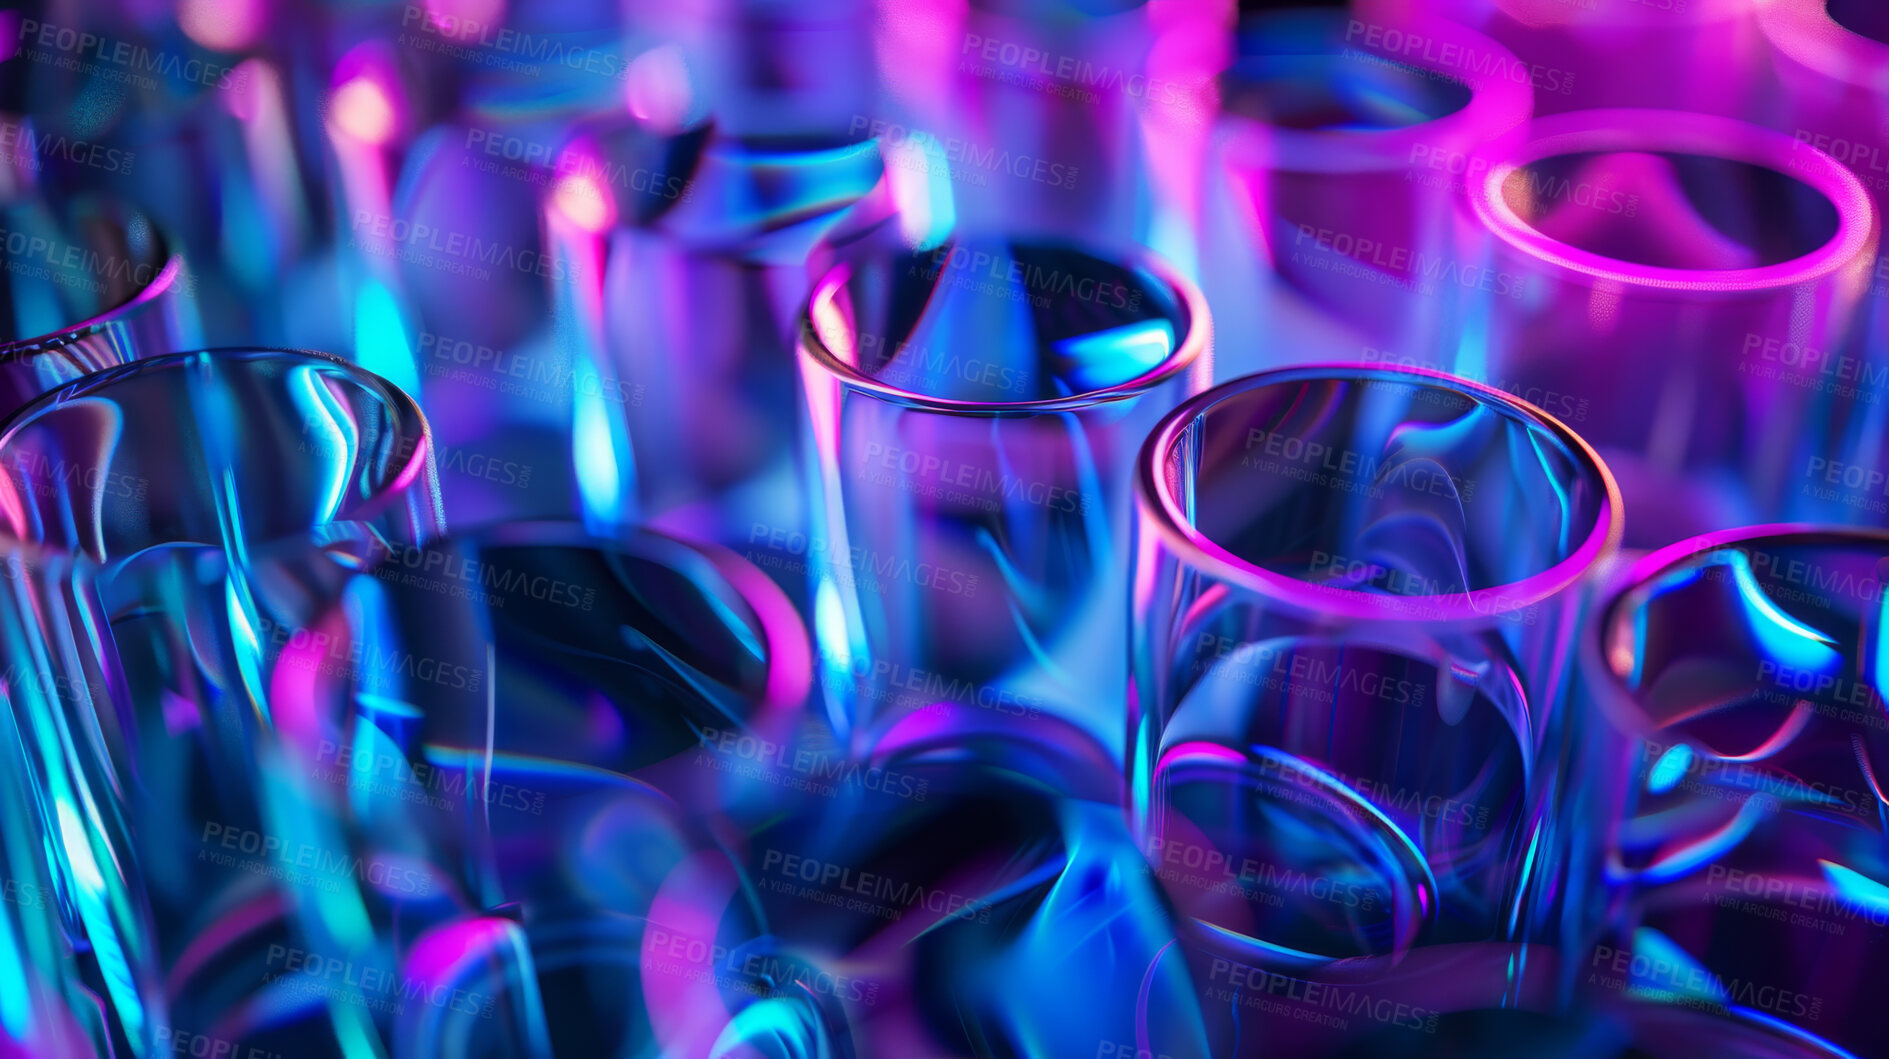 Buy stock photo Holographic, glass and wallpaper as abstract art with iridescent glow as neon background, liquid or creativity. Metallic, glowing and 3d design or shot for party with texture, pattern or reflection